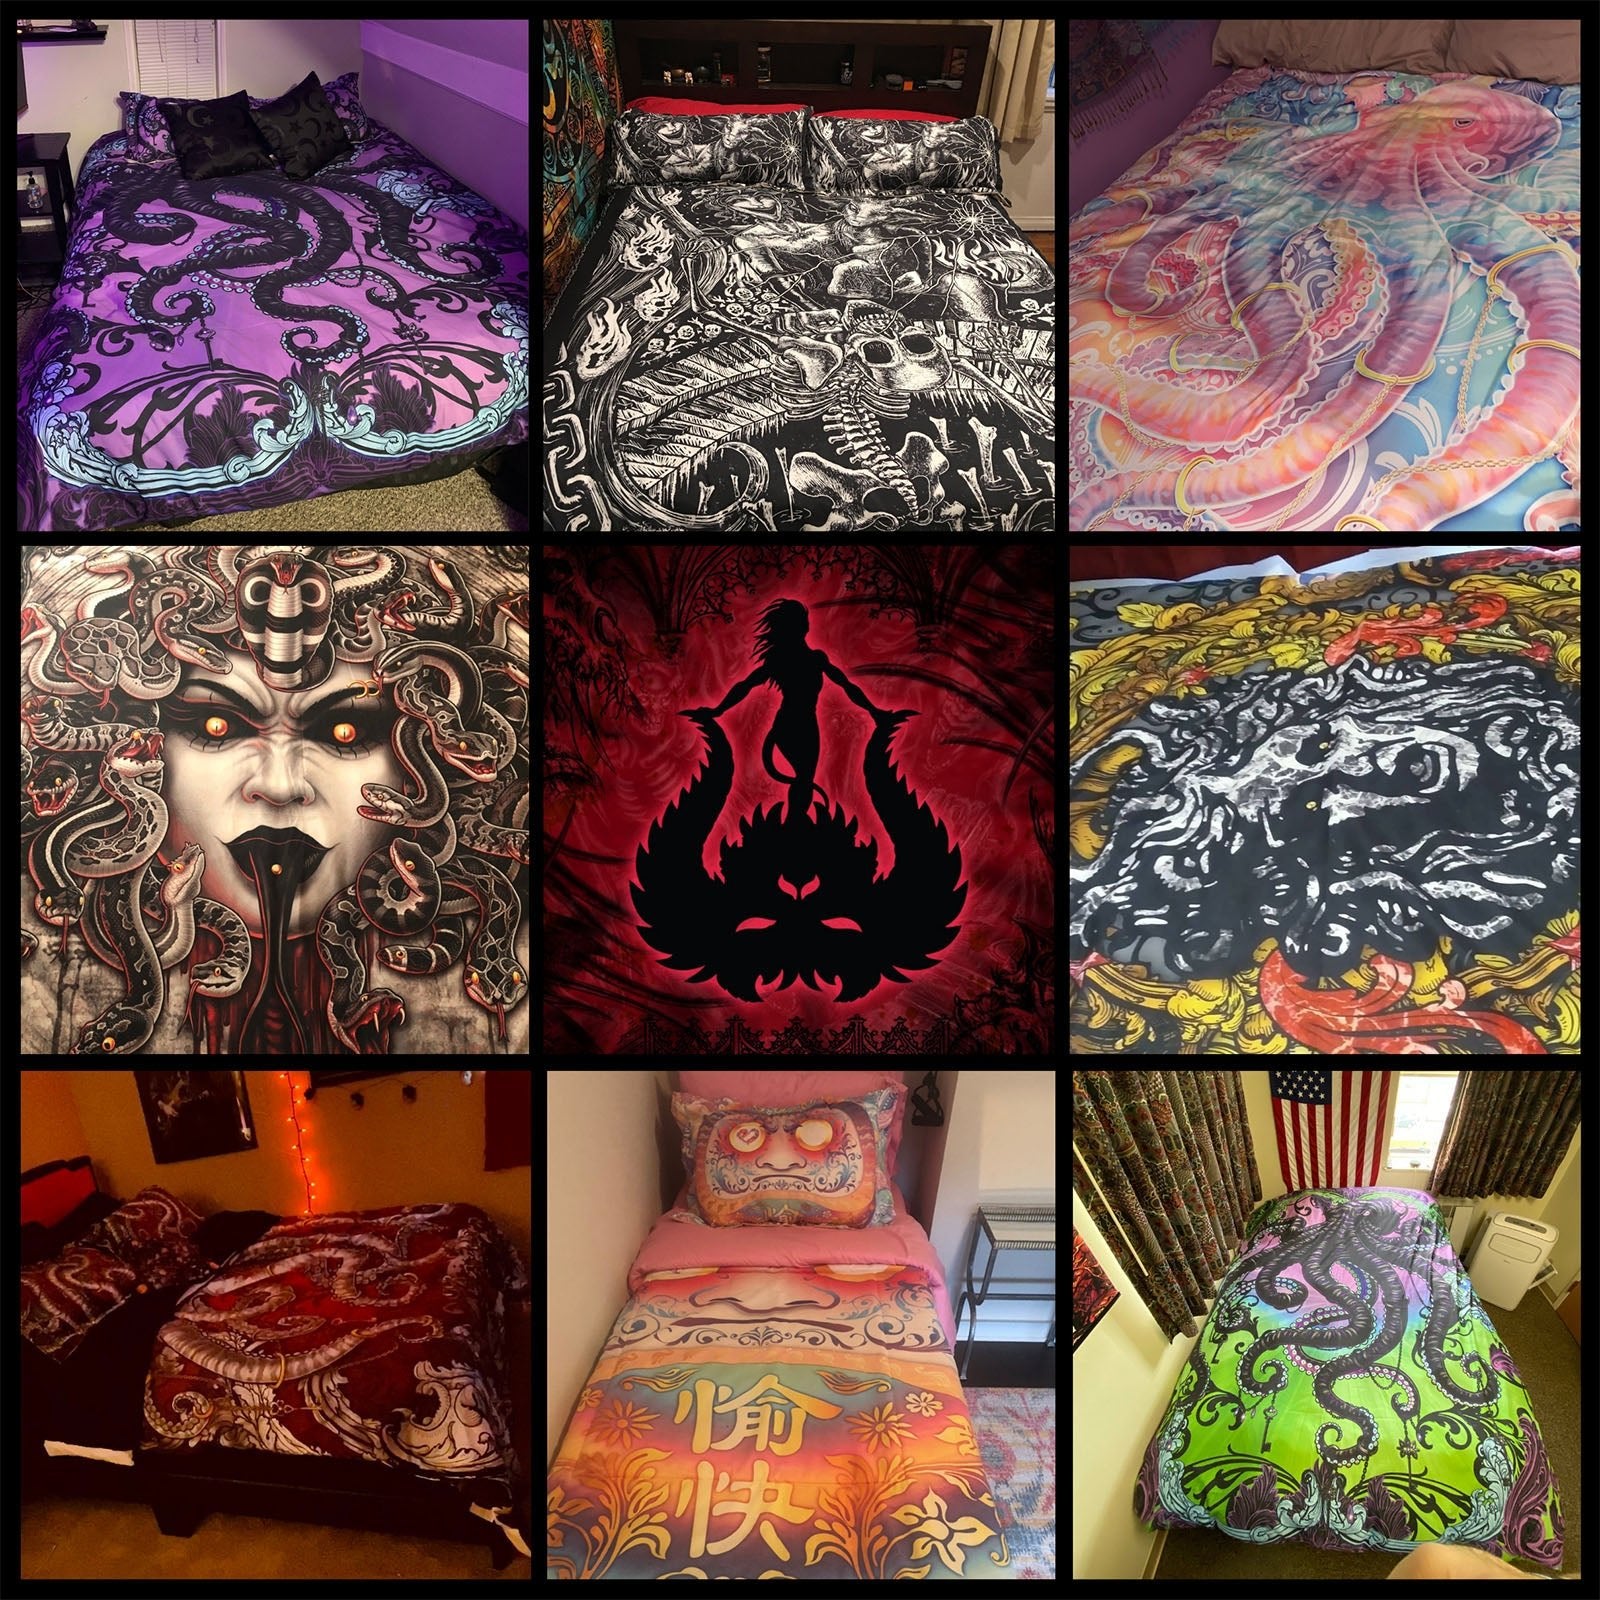 Satanic Medusa Bedding Set, Comforter and Duvet, Pentagram, Horror Bed Cover and Bedroom Decor, King, Queen and Twin Size - 3 Faces - Abysm Internal